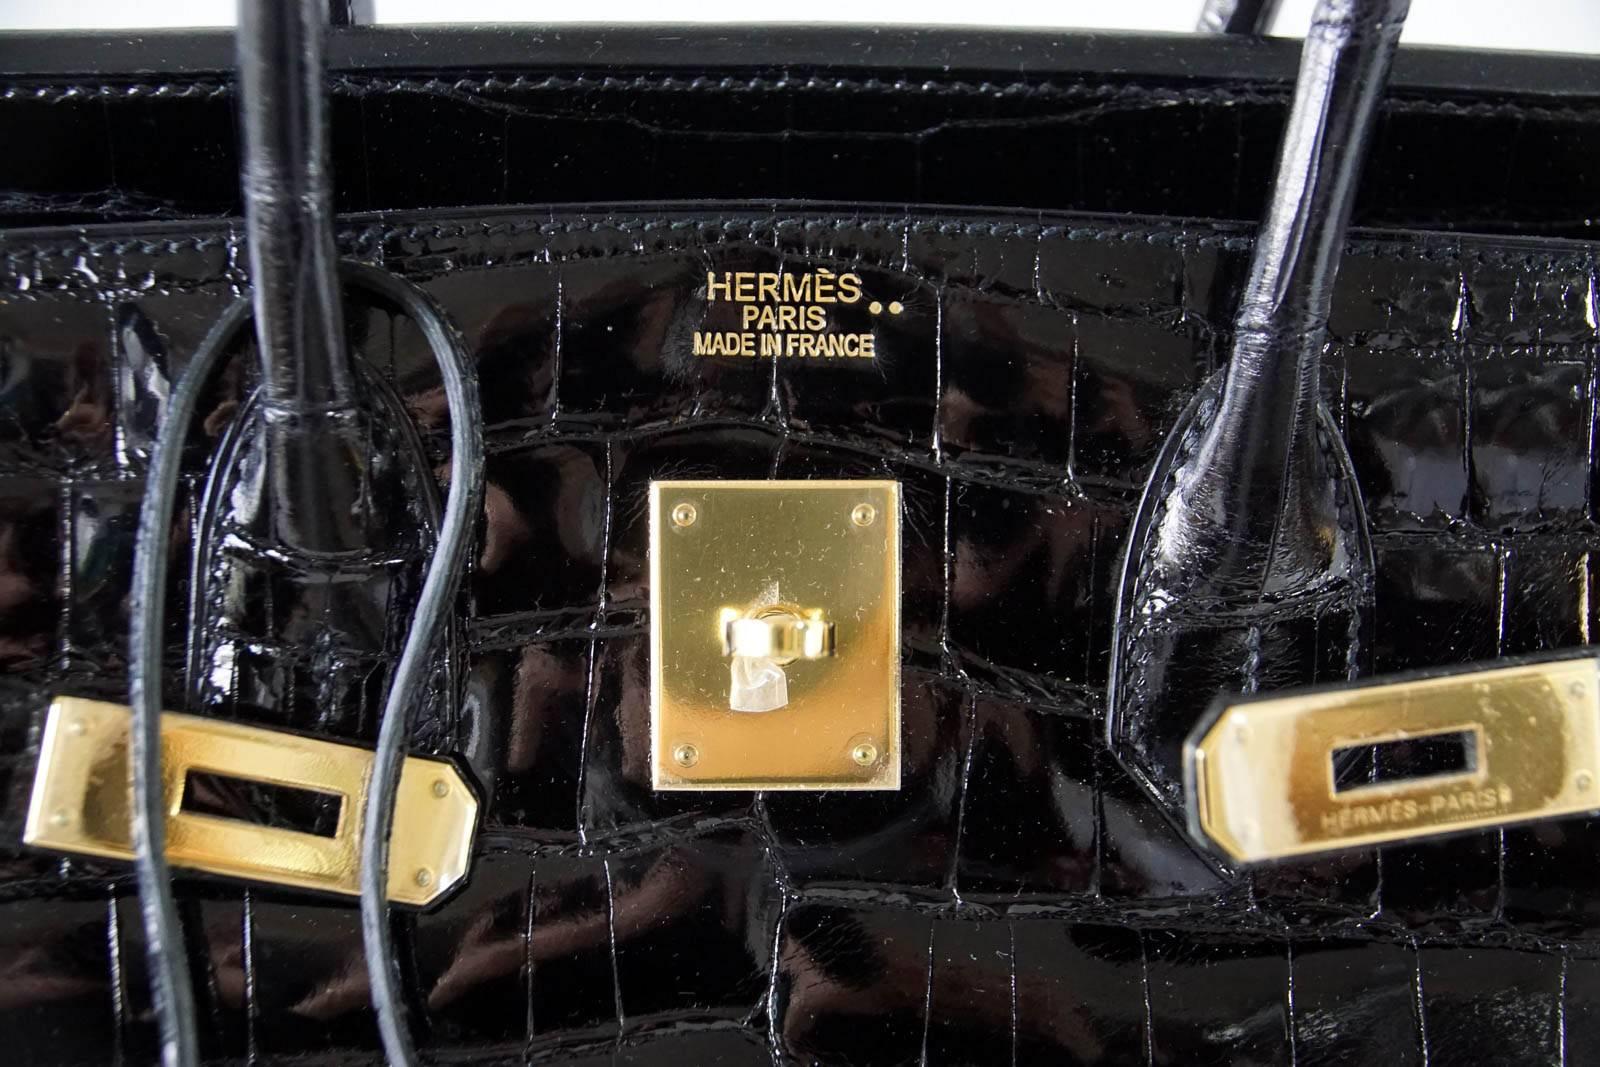 Guaranteed authentic coveted Hermes 35 Birkin bag Black Niloticus Crocodile.
This magnificent bag with Gold Hardware is breathtaking.
Comes with lock and keys in the clochette and sleeper.
Bag body, handles, and corners interior are mint. Plastic on